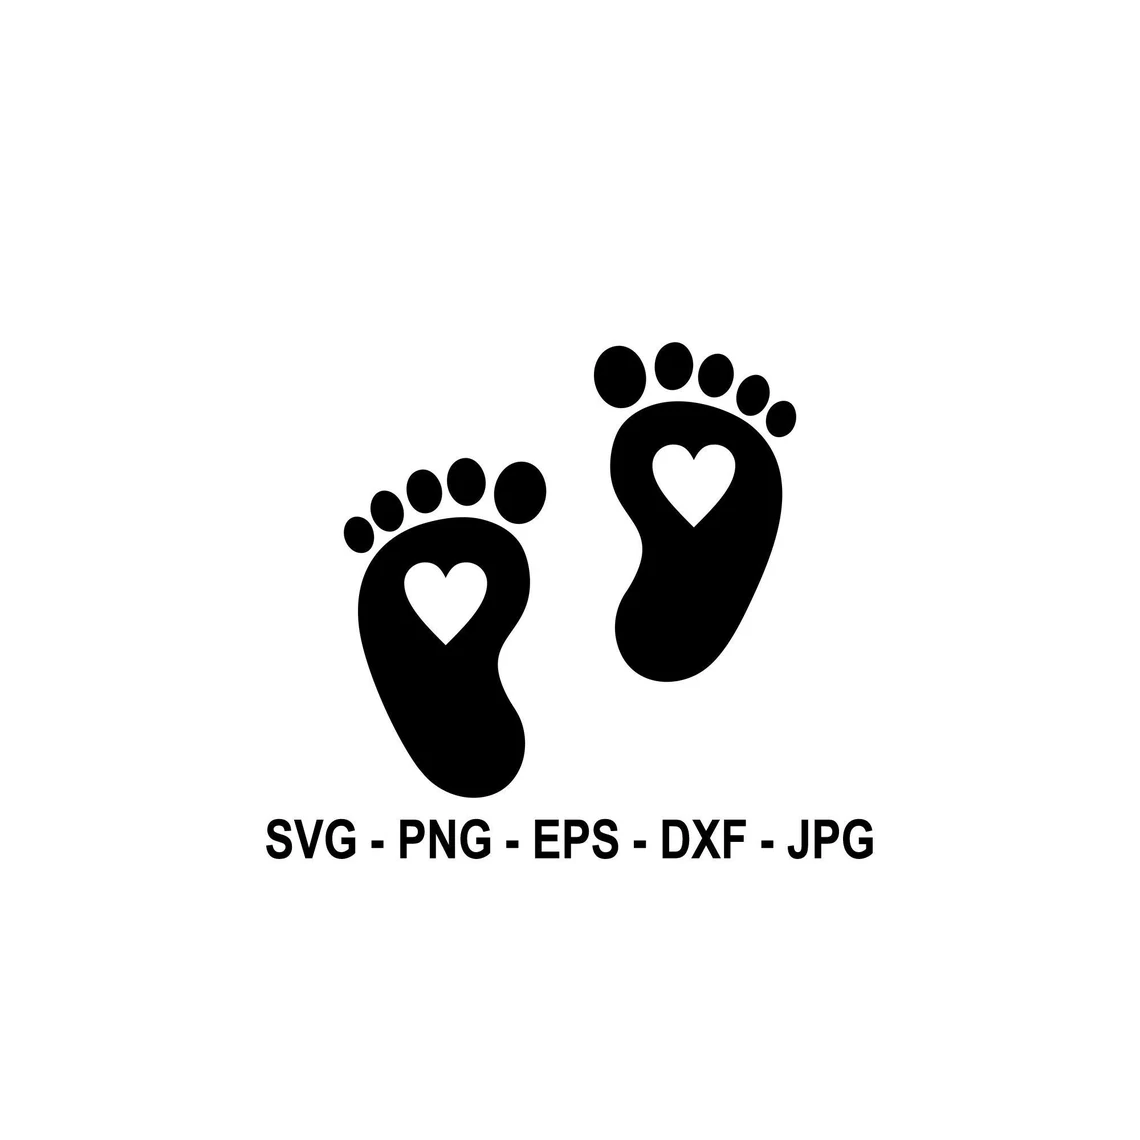 Footprints with a heart.